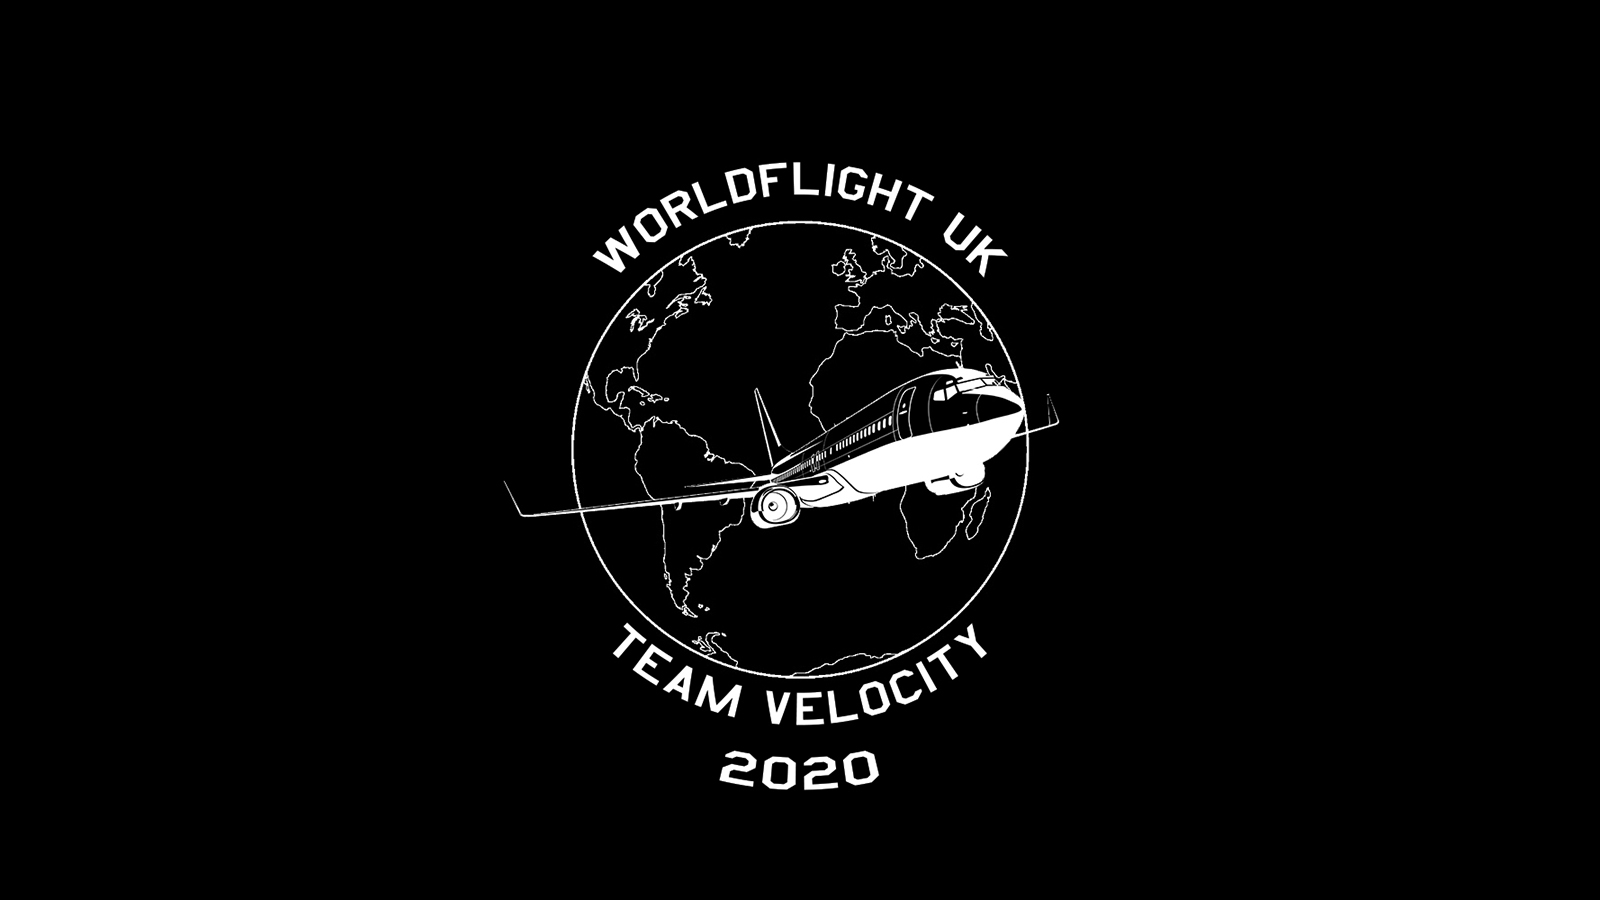 Worldflight 2020 Takes Off Today